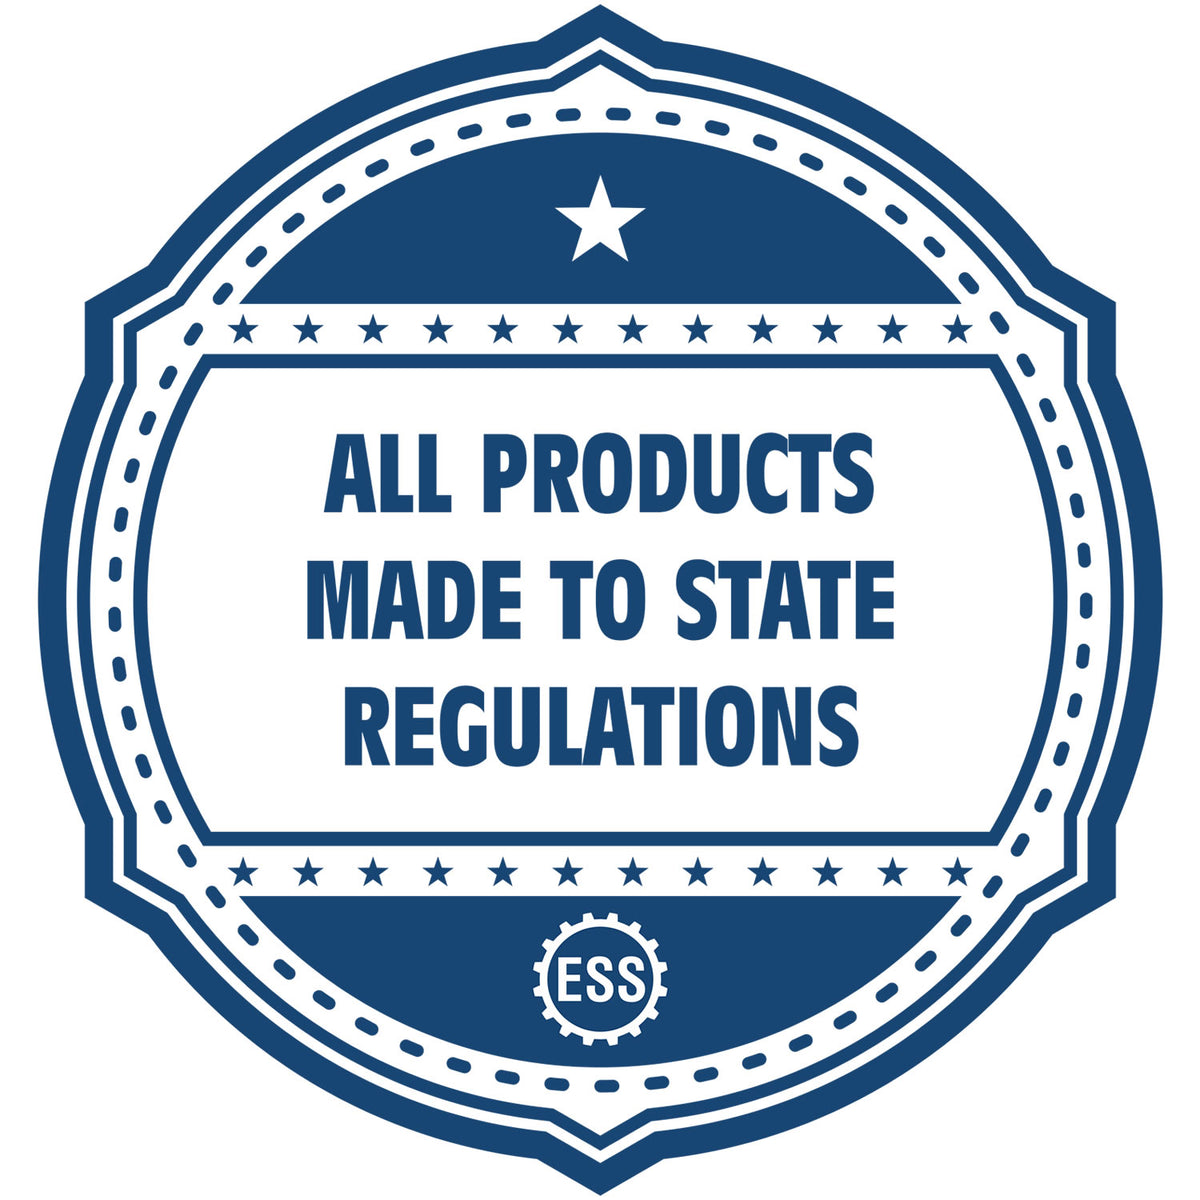 An icon or badge element for the Heavy-Duty Illinois Rectangular Notary Stamp showing that this product is made in compliance with state regulations.